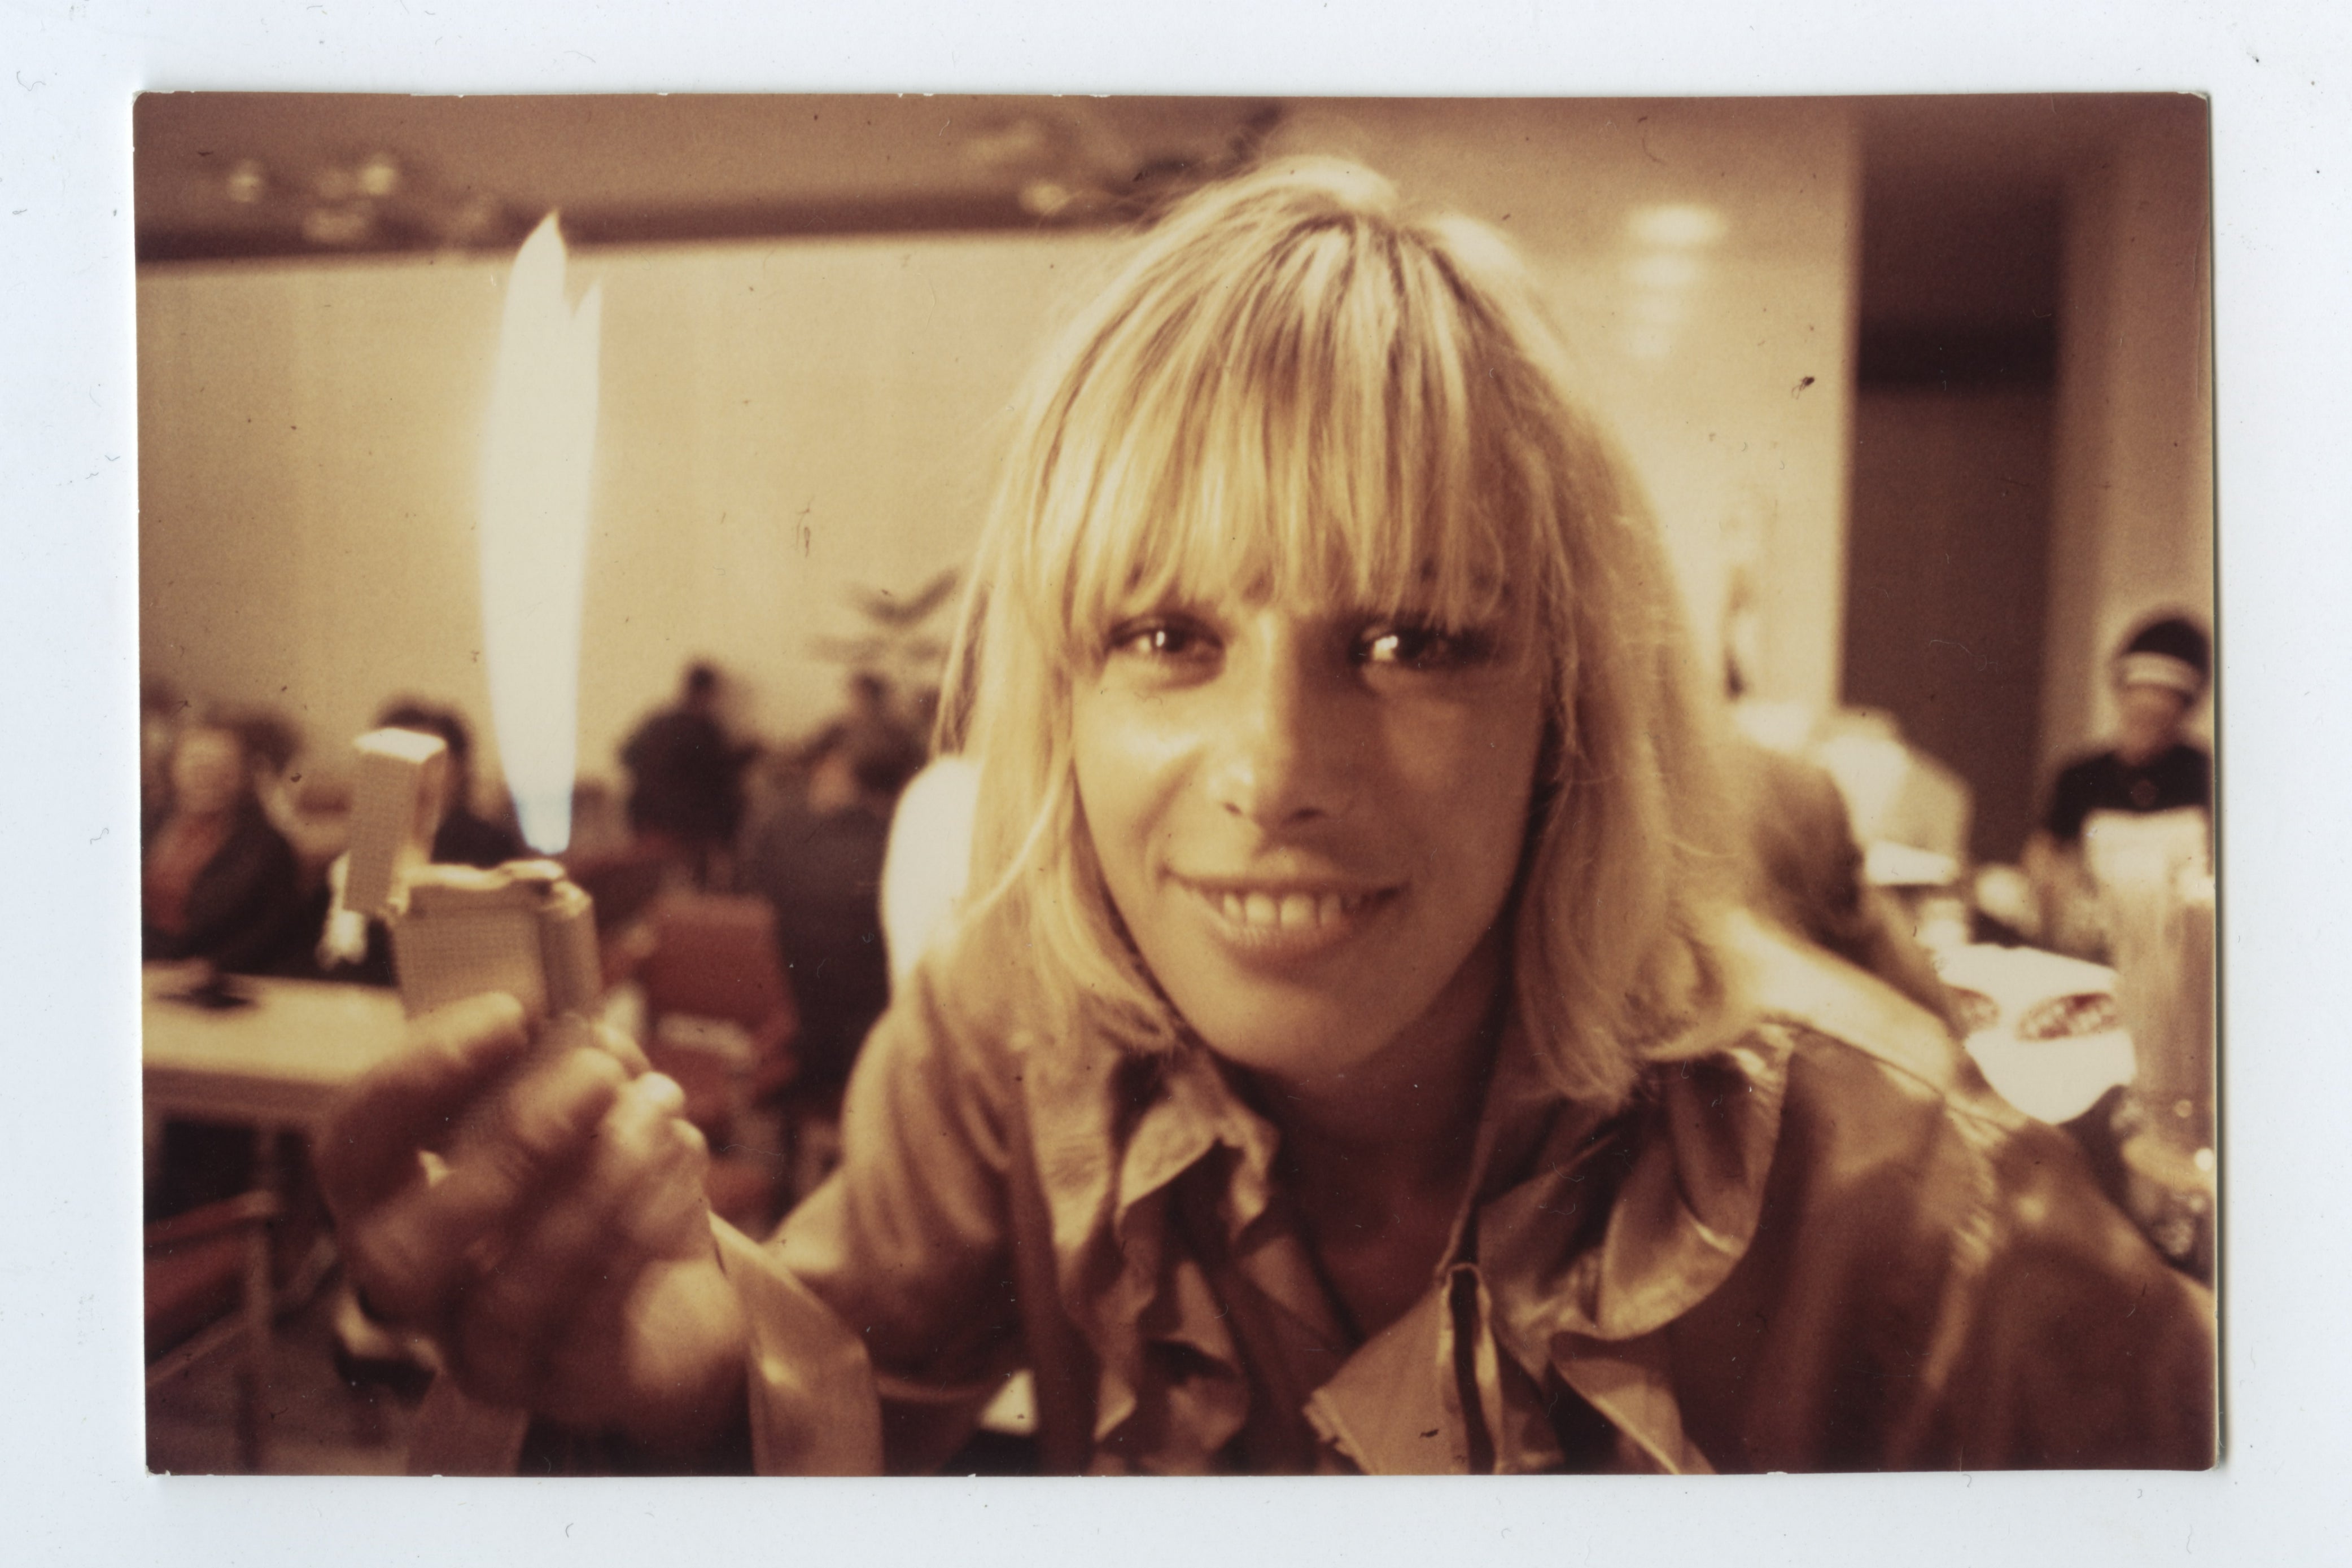 Play with fire: Marlon Richards, son of Anita Pallenberg and Keith Richards, explores his mother’s story with directors Alexis Bloom and Svetlana Zill in ‘Catching Fire’